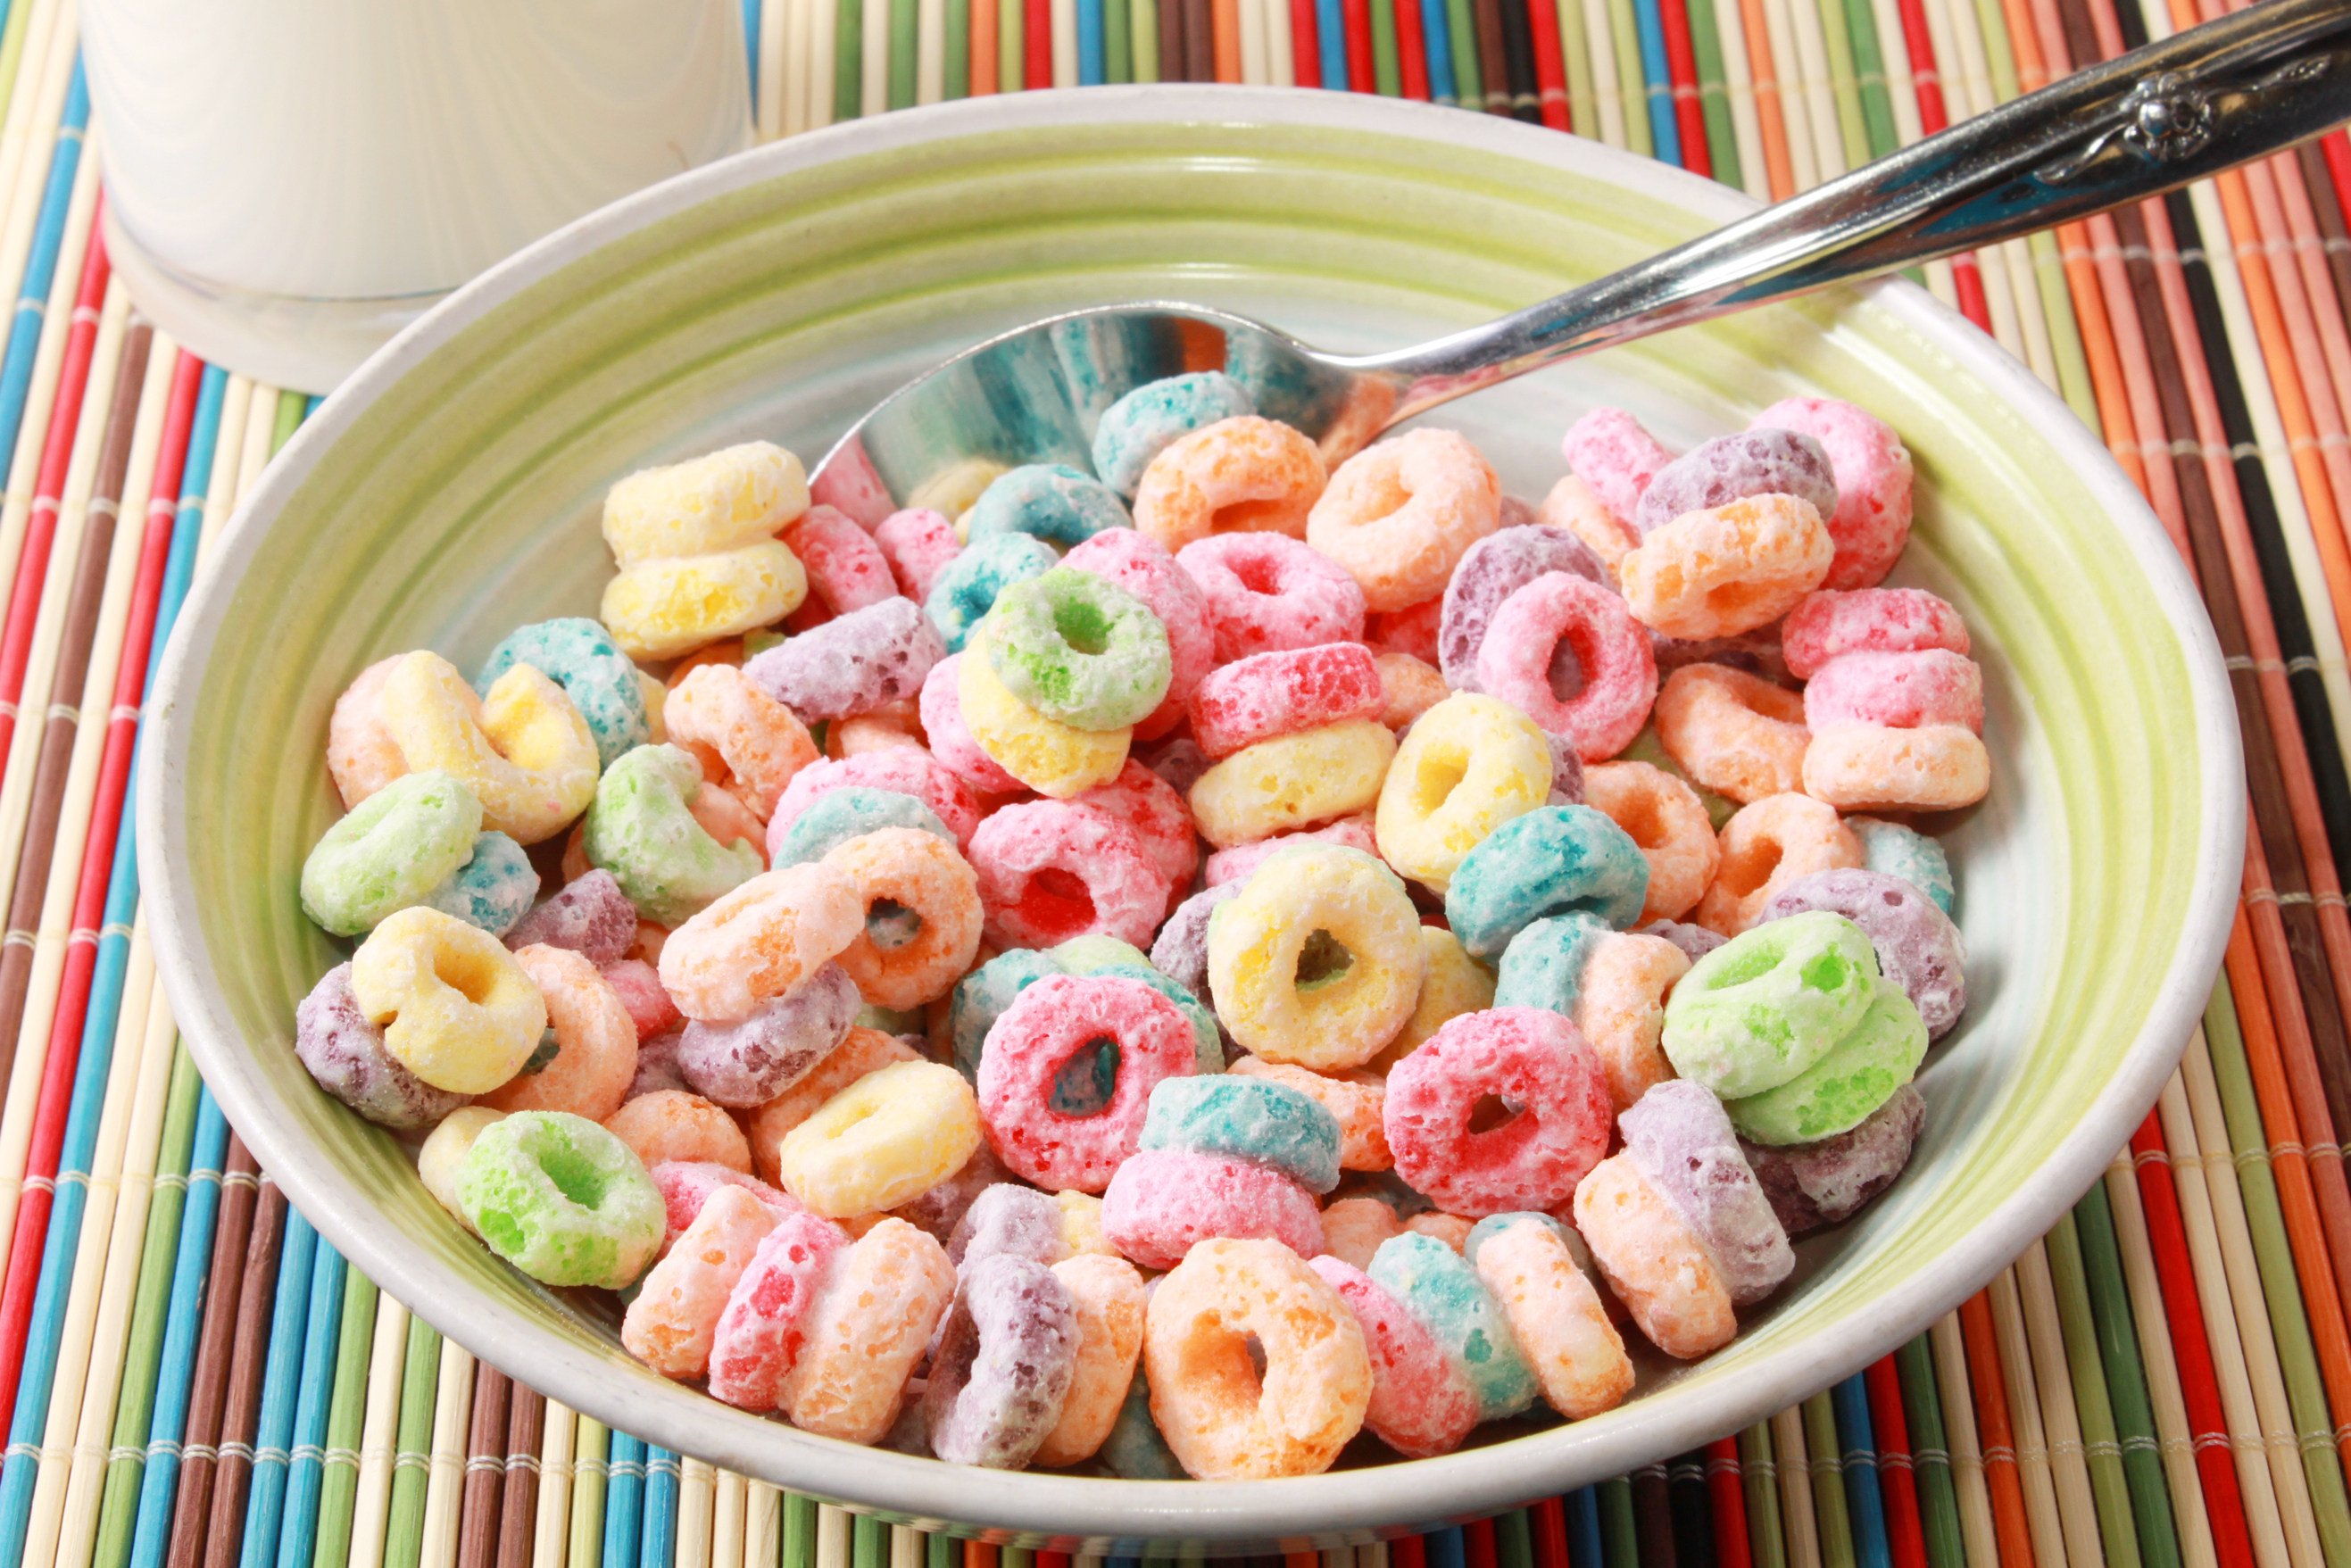 Sweetened cereals are a common breakfast food that are ultra-processed and potentially harmful. A University College London professor explains why ultra-processed foods are dangerous, and how to spot them. Photo: Shutterstock